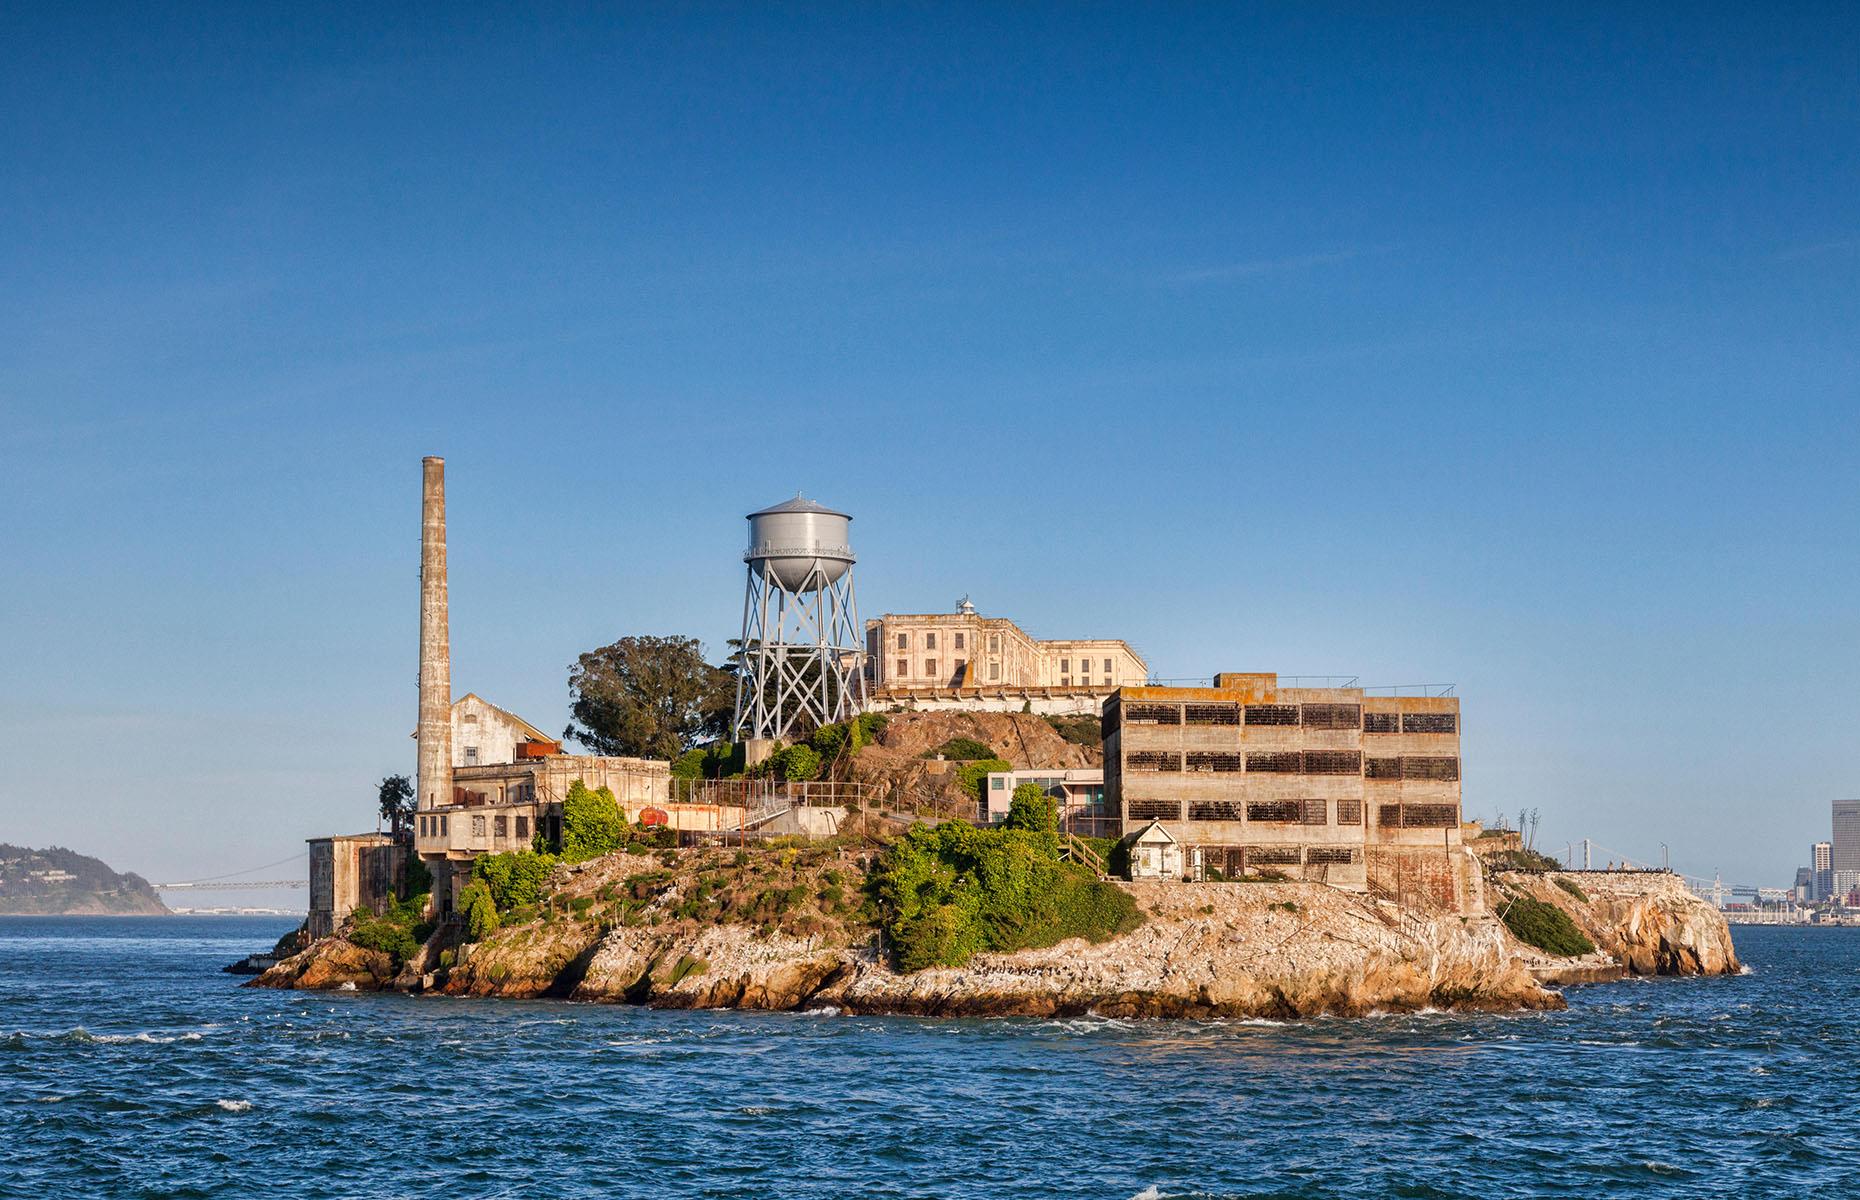 <p>Spending decades as America's most formidable prison – and now serving as a mysterious tourist attraction – Alcatraz has captured popular imagination for more than a century. But how much do you know about its chequered history?</p>  <p><strong>Click through this gallery to learn the site's mysterious story, from its origins as a military fort, through its time housing America's most dangerous criminals, to its modern-day status as one of the country's most beguiling abandoned places...</strong></p>